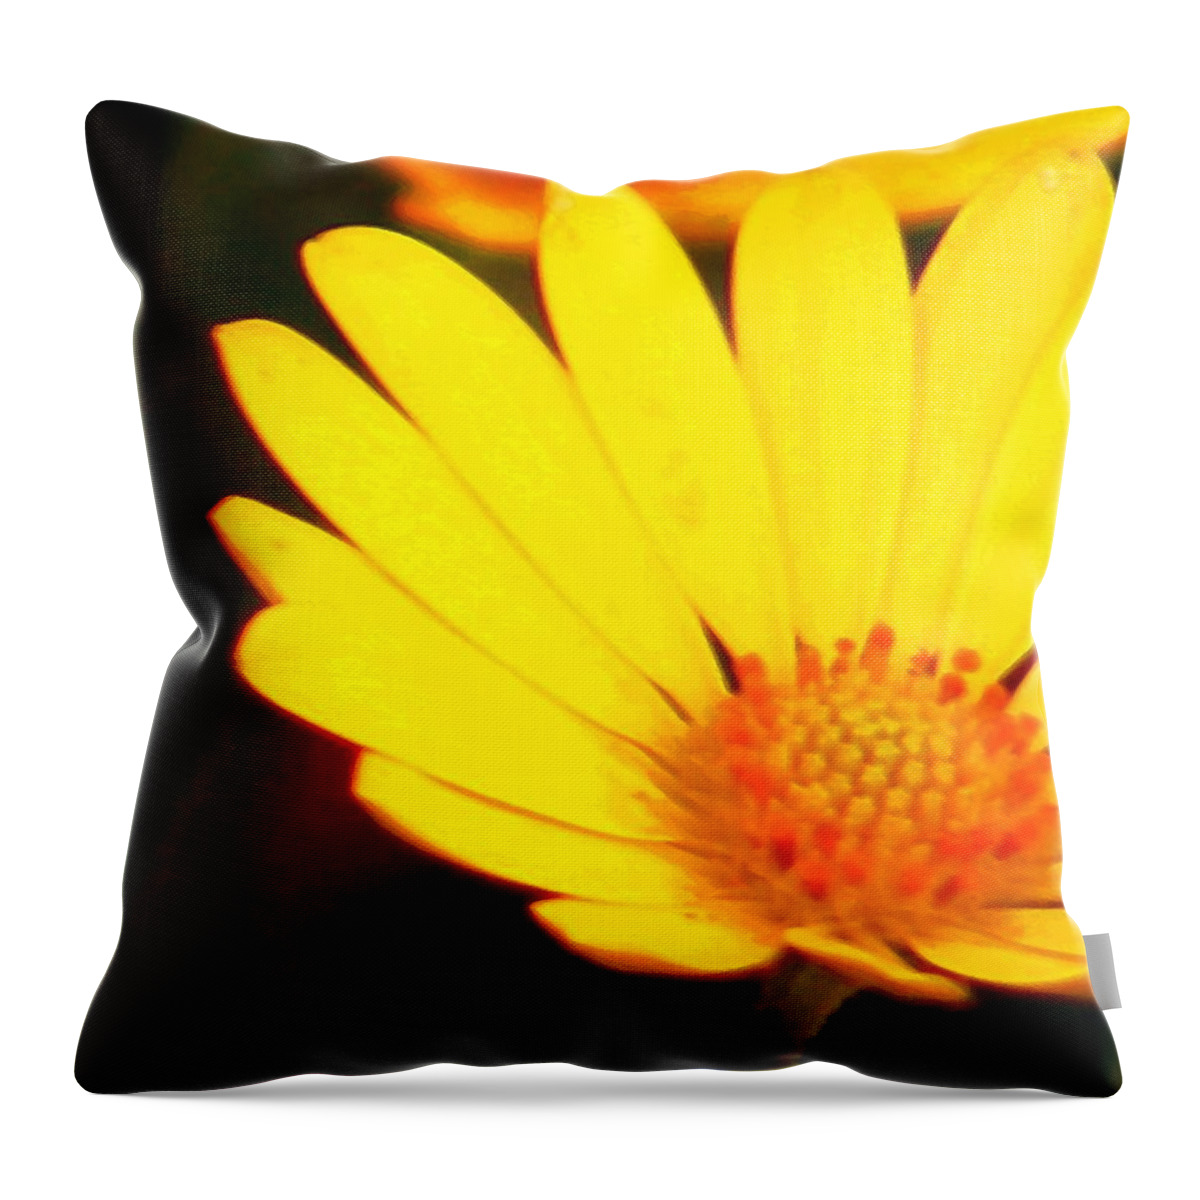 Daisy Throw Pillow featuring the photograph Daisy by Timothy Bulone